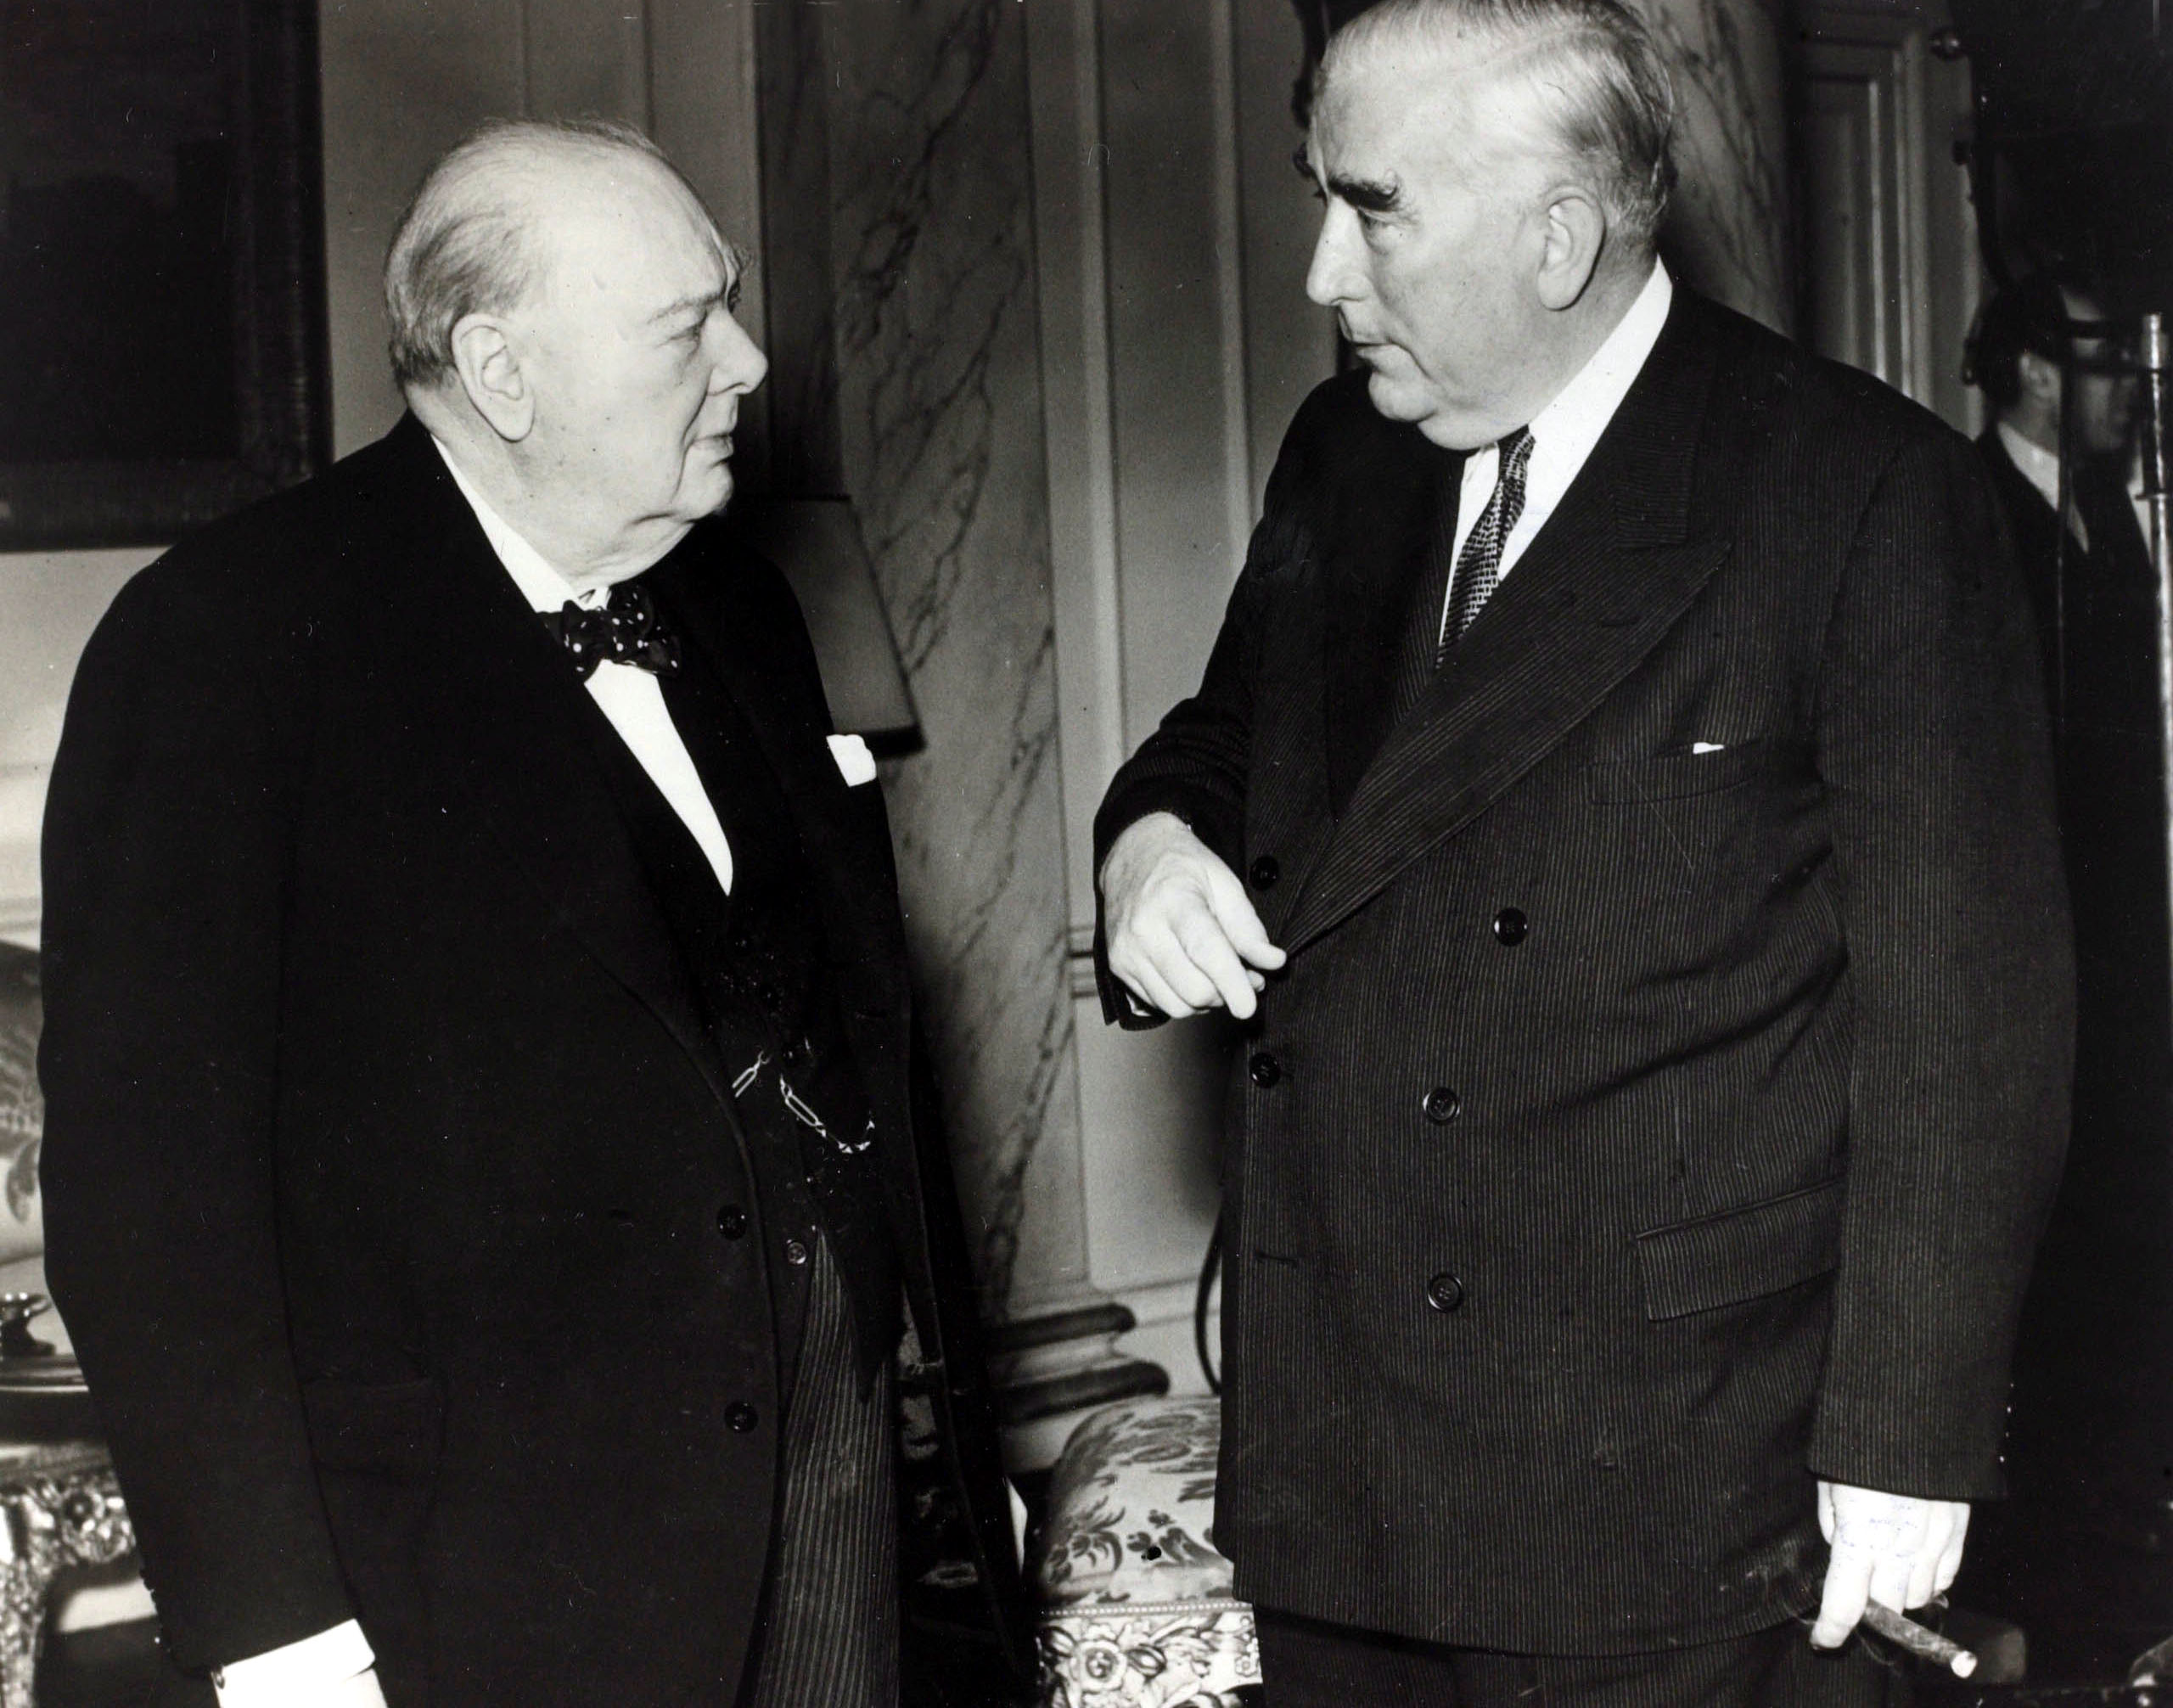 Robert Menzies meets Winston Churchill at the Commonwealth Conference of Prime Ministers in London, January 1955